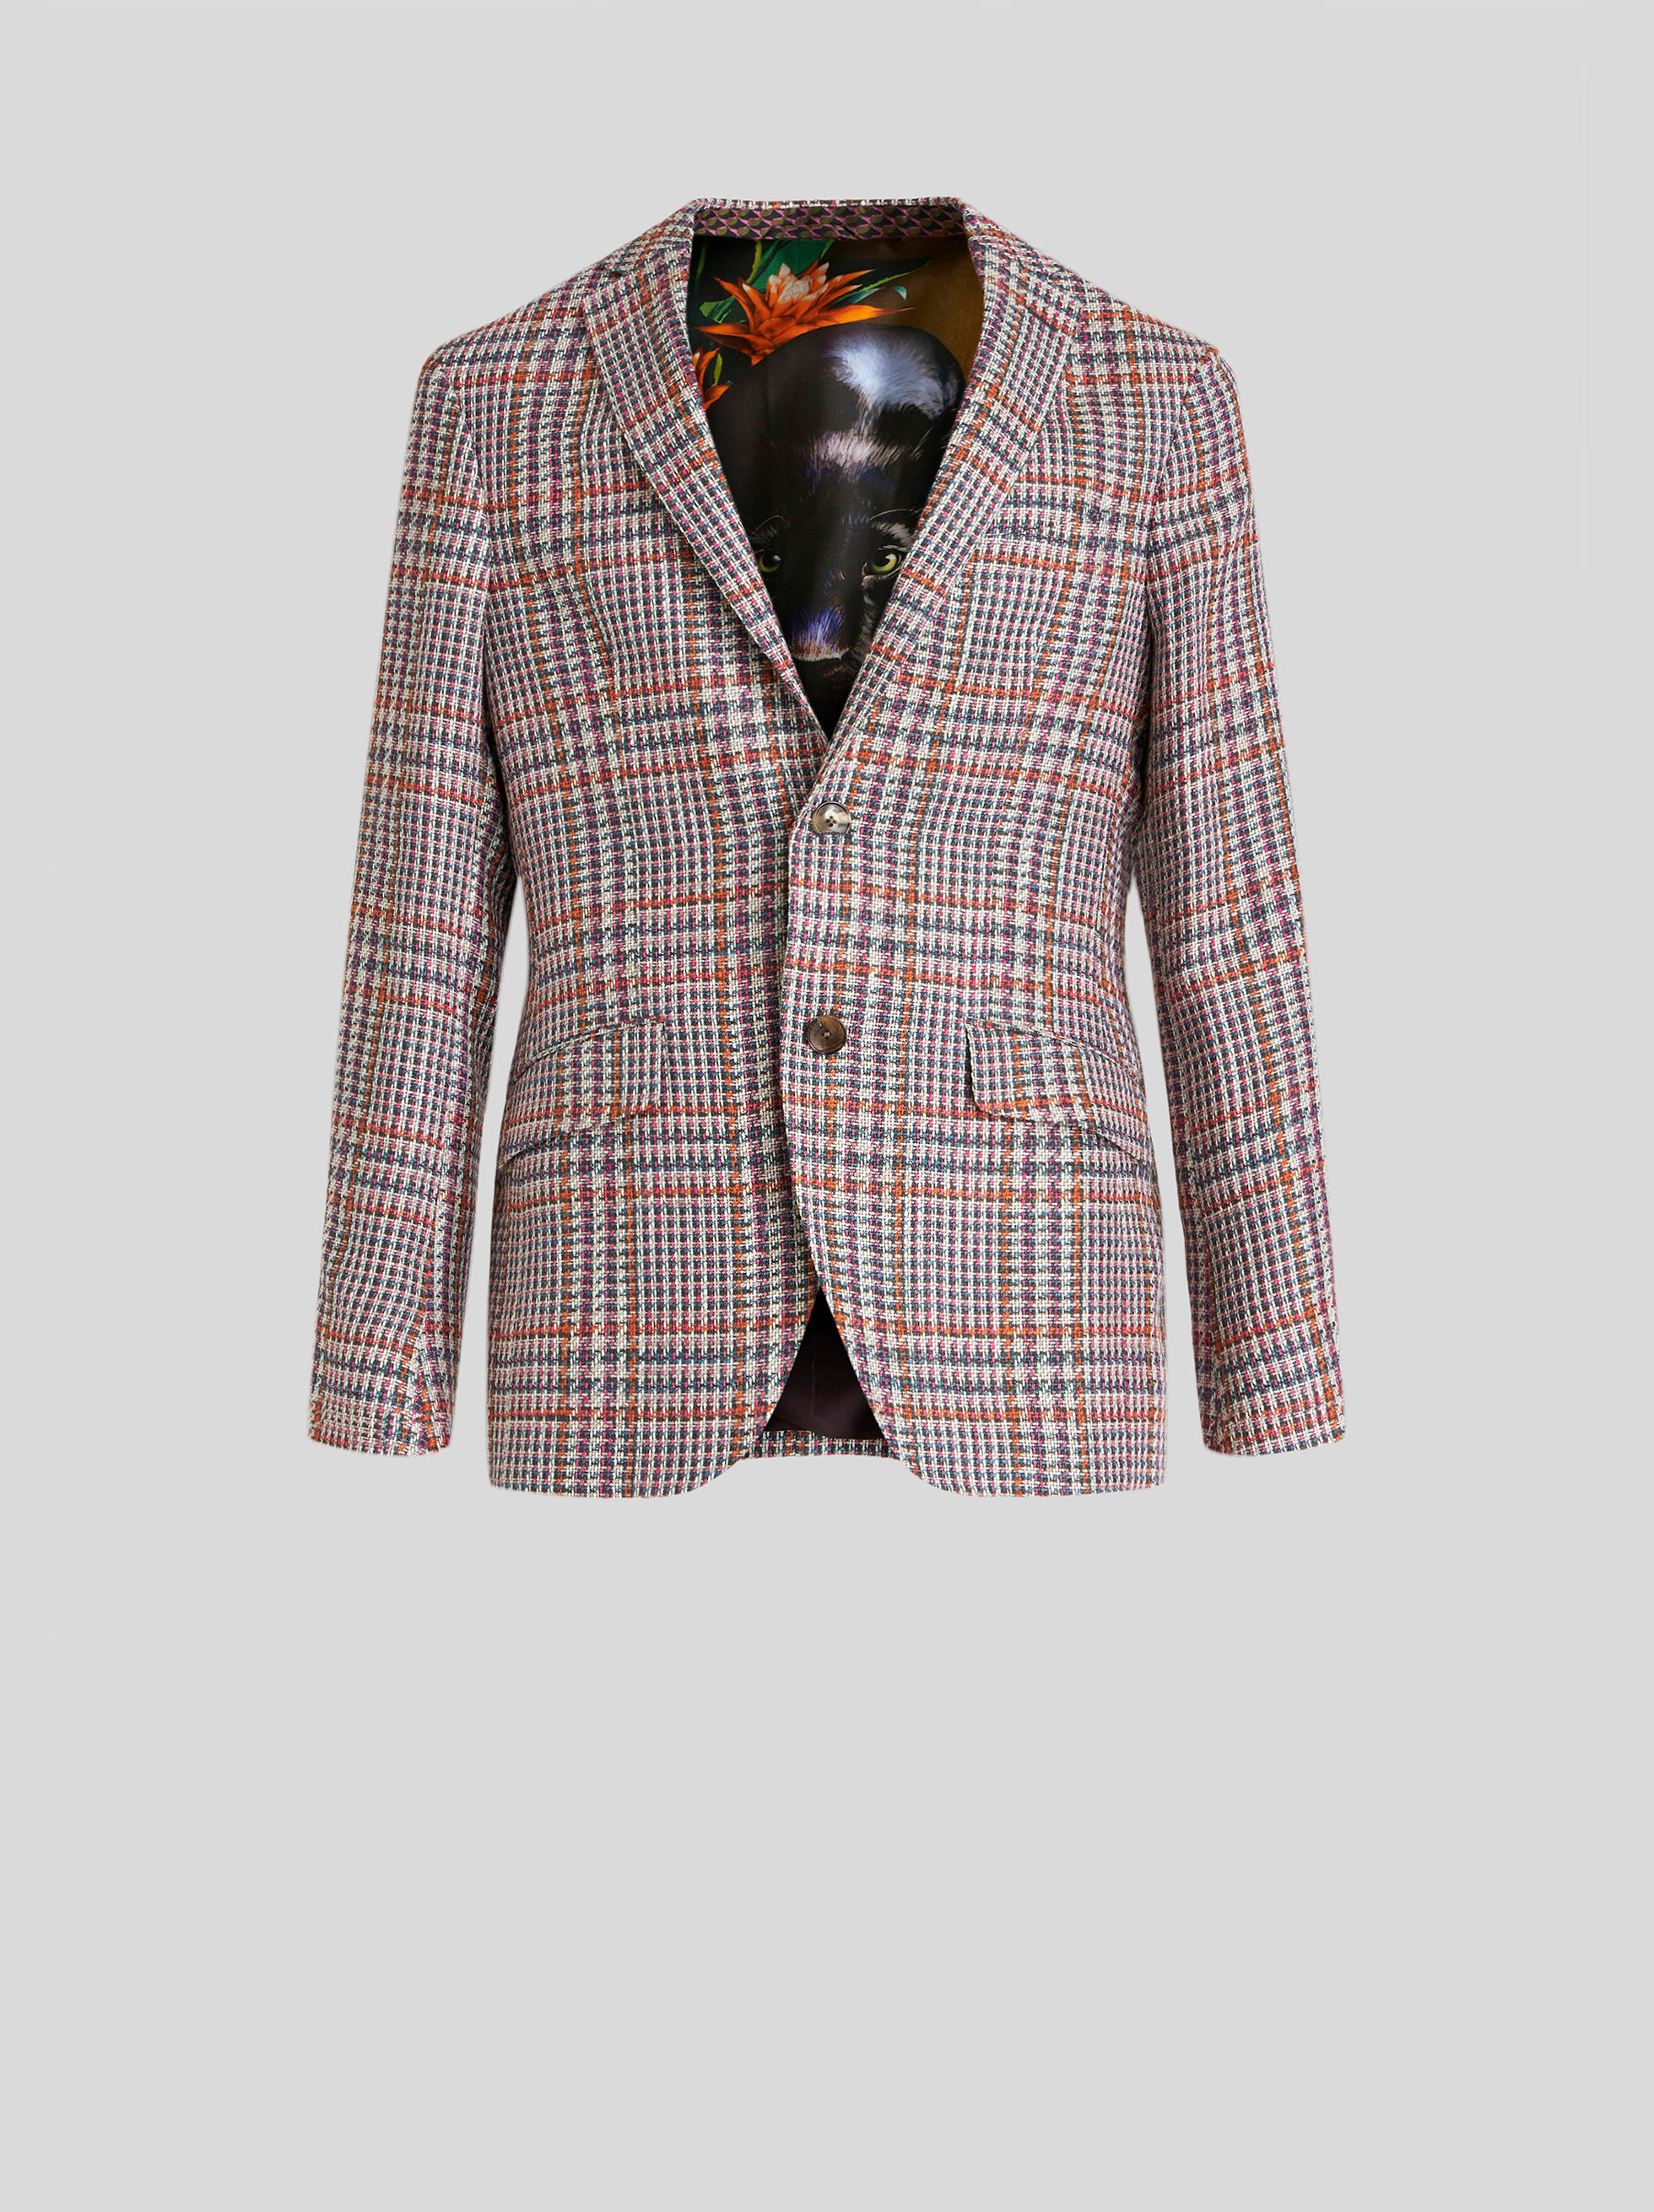 TAILORED PRINCE OF WALES CHECK JACKET